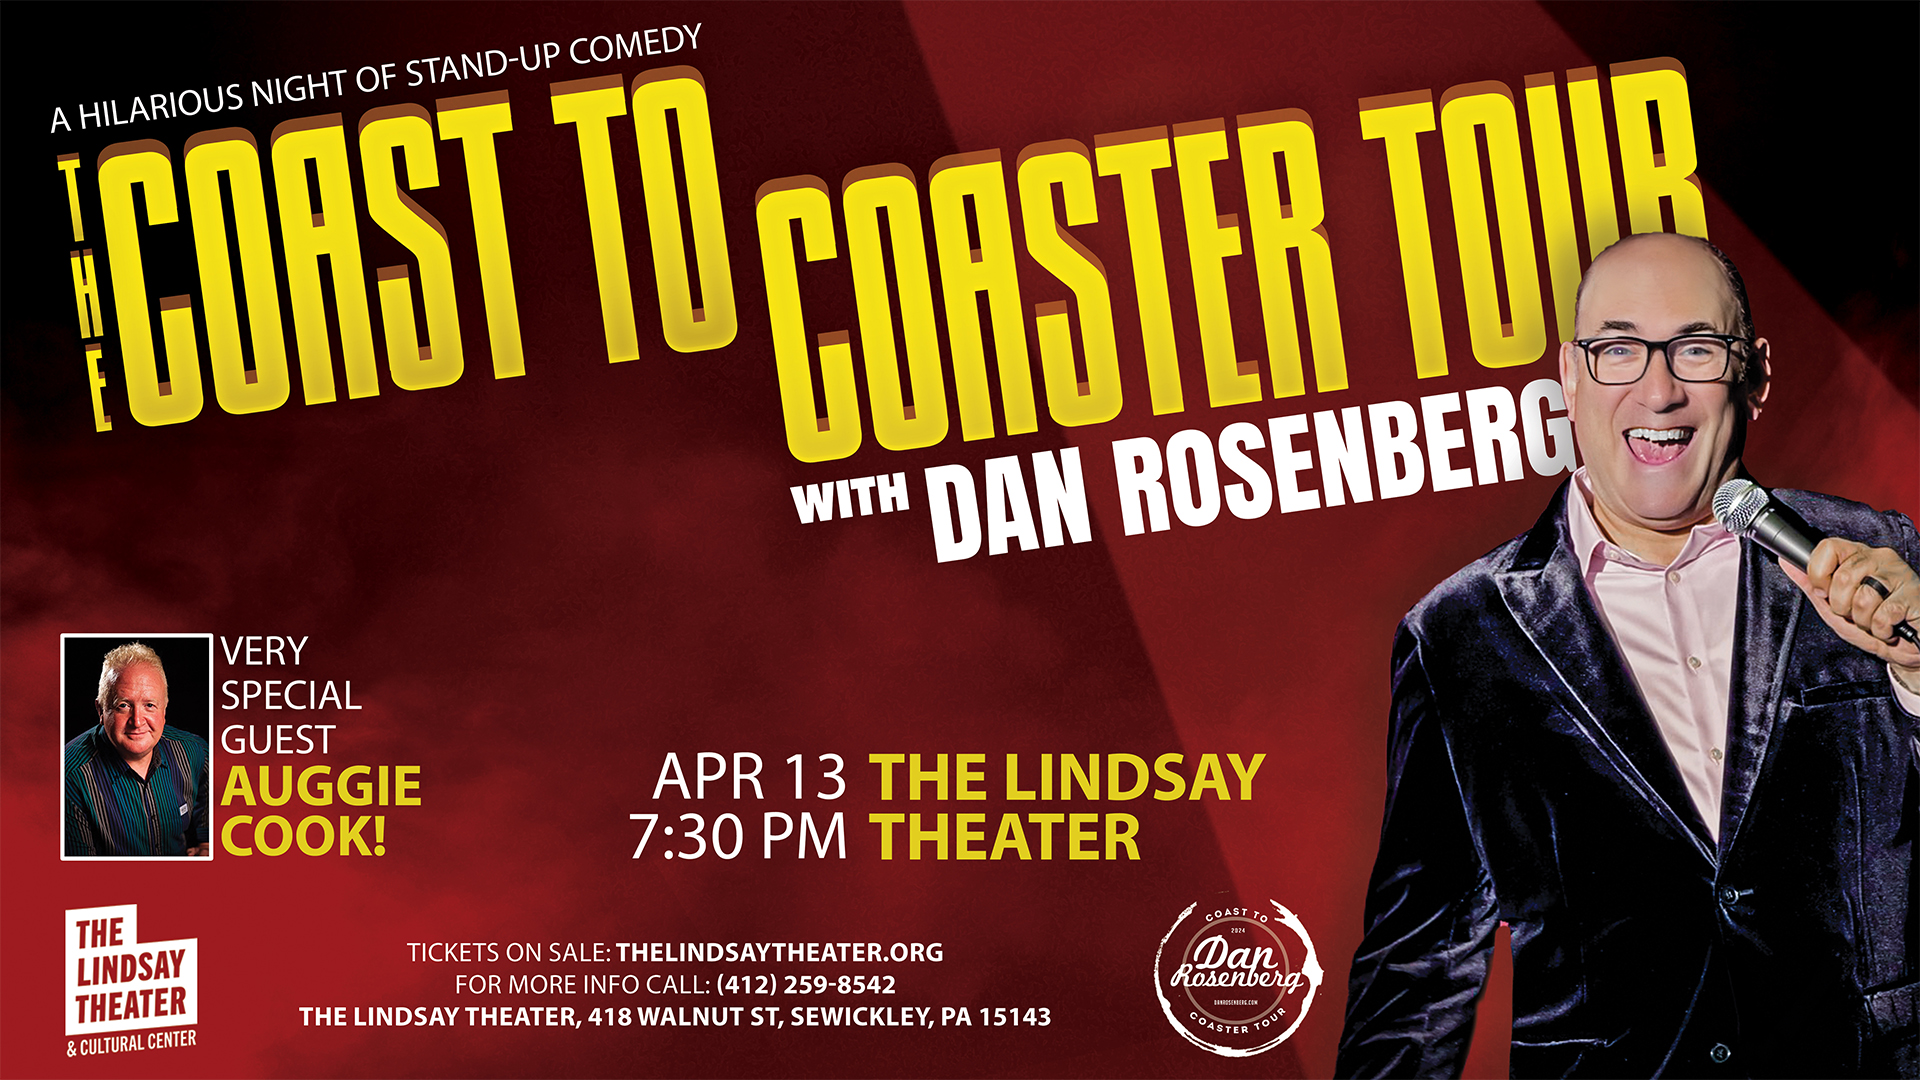 Dan Rosenberg smiles with microphone. Behind is the text "Coast to Coaster Tour with Dan Rosenberg"